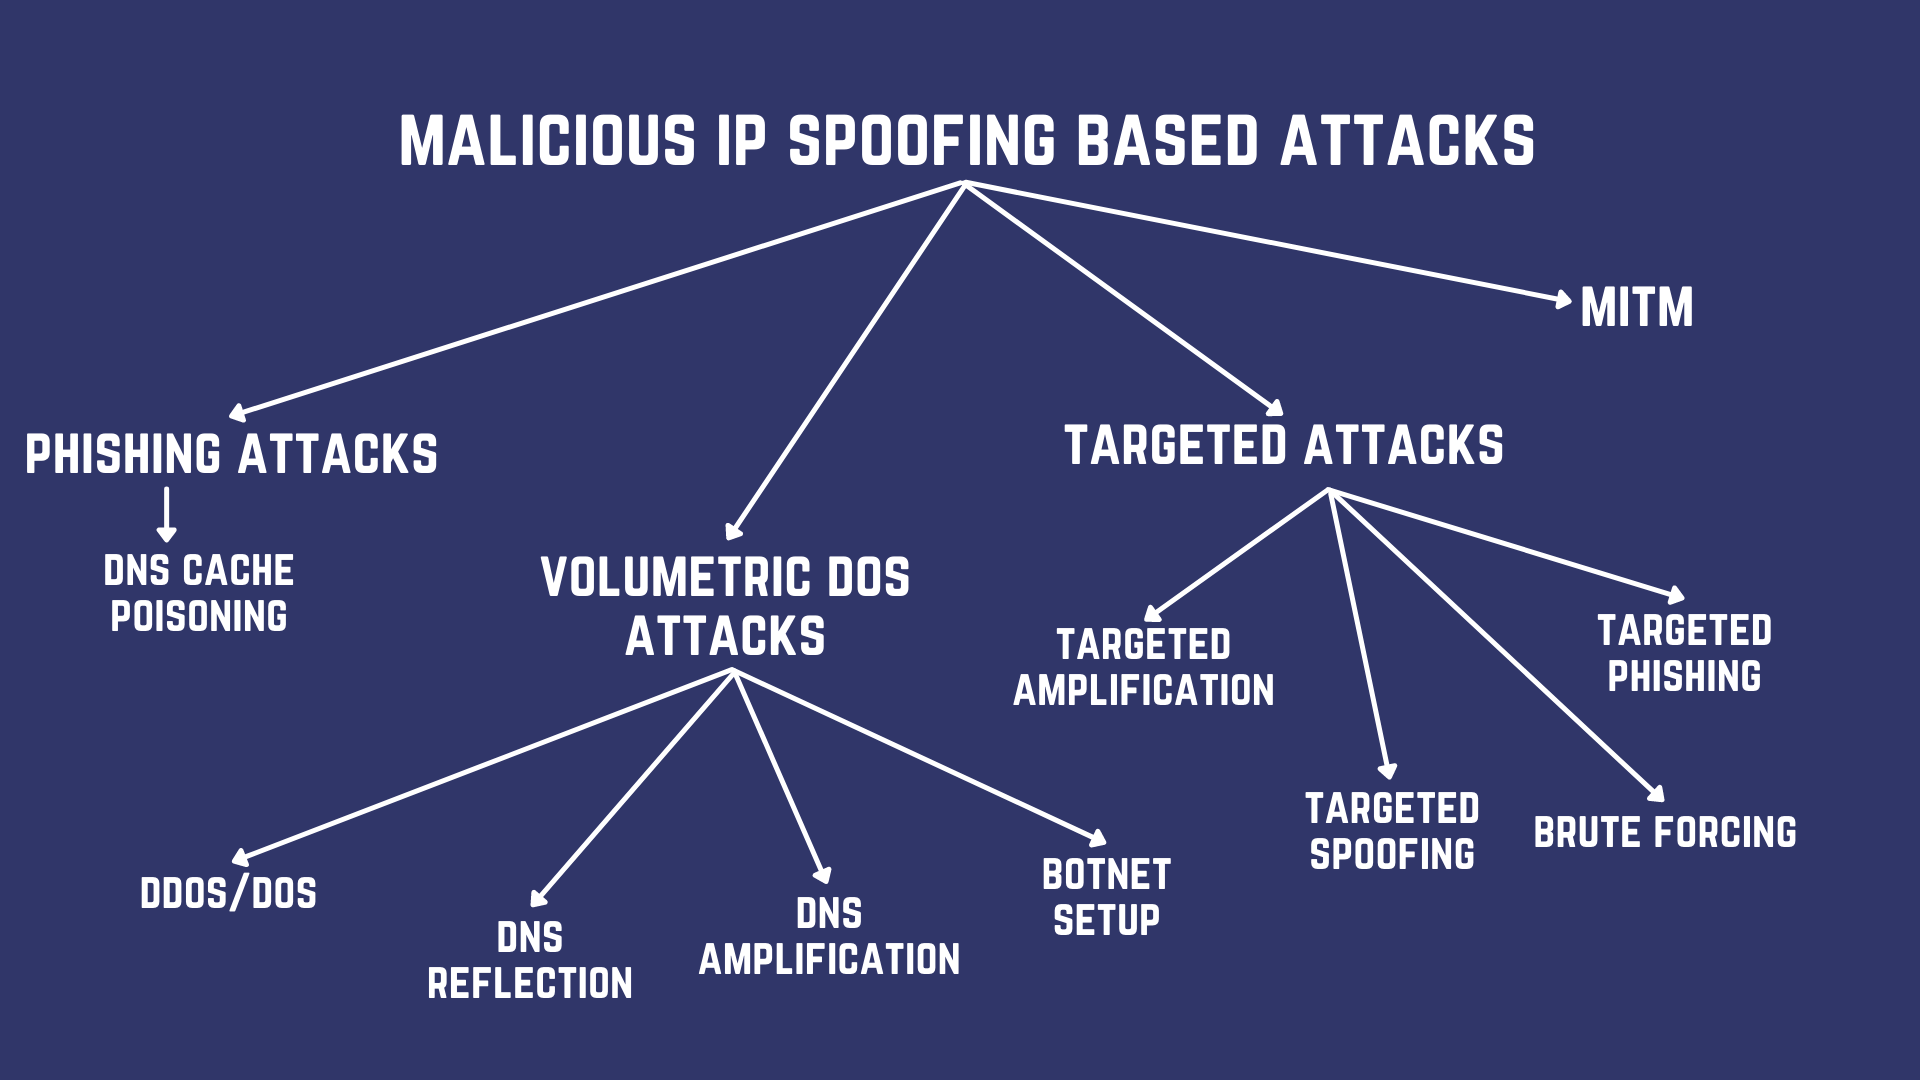 chart summarizing different attacks based on ip spoofing